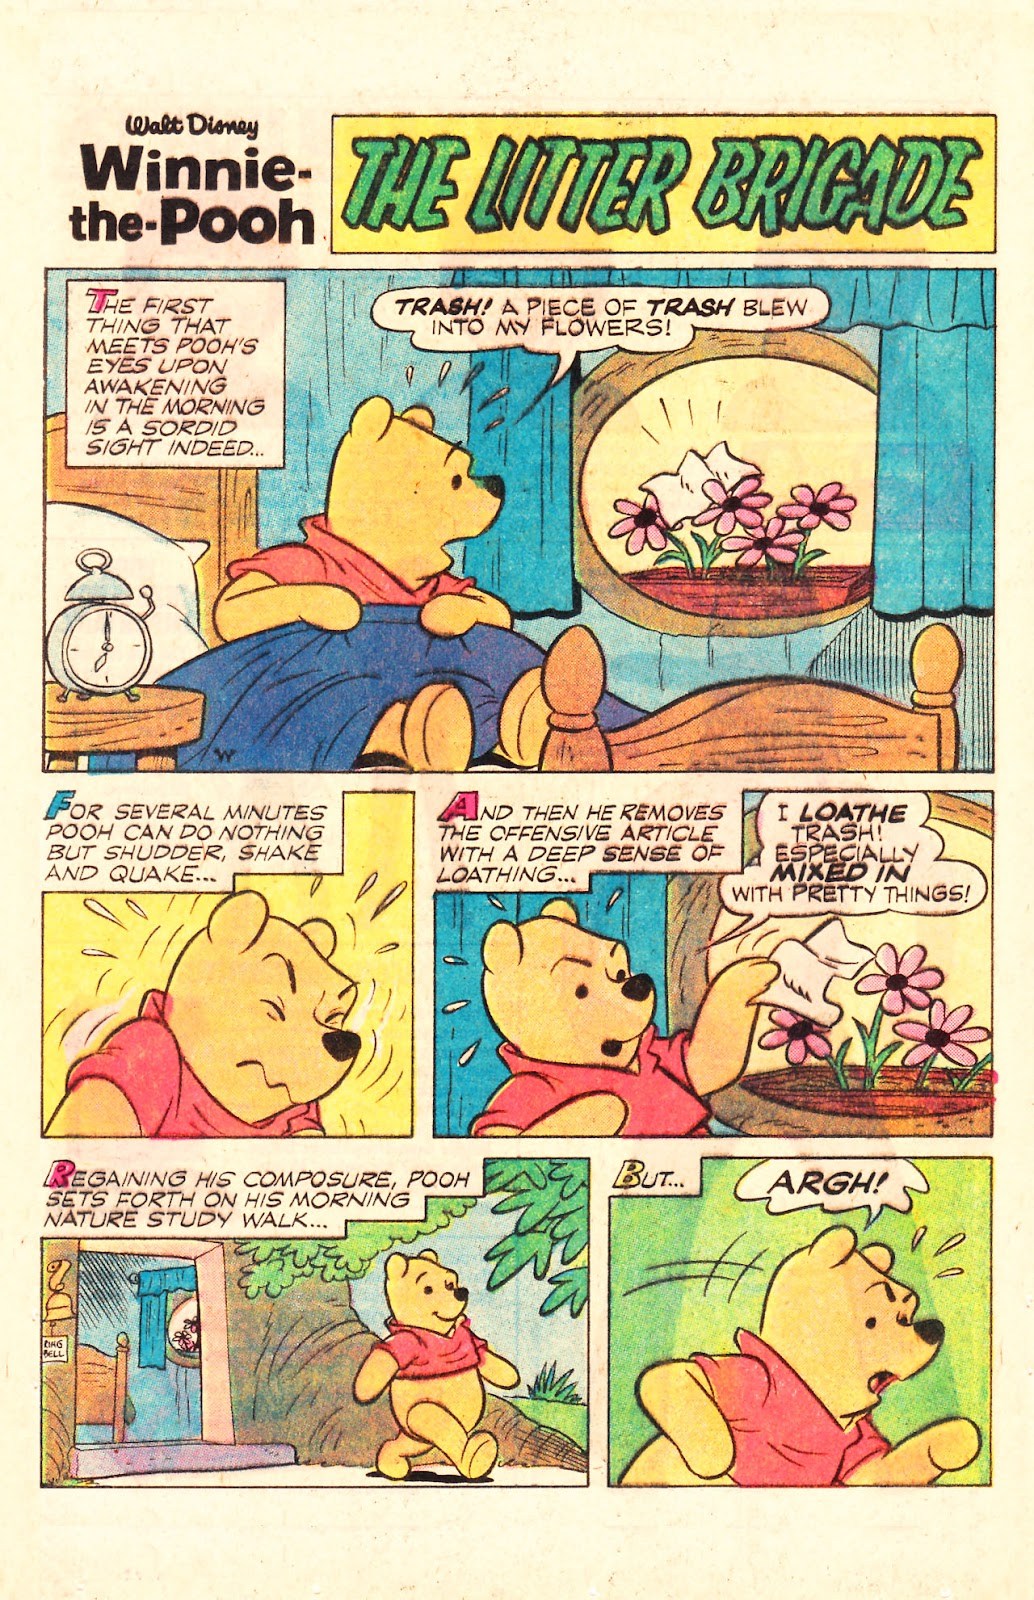 Winnie The Pooh 19 Read All Comics Online For Free 